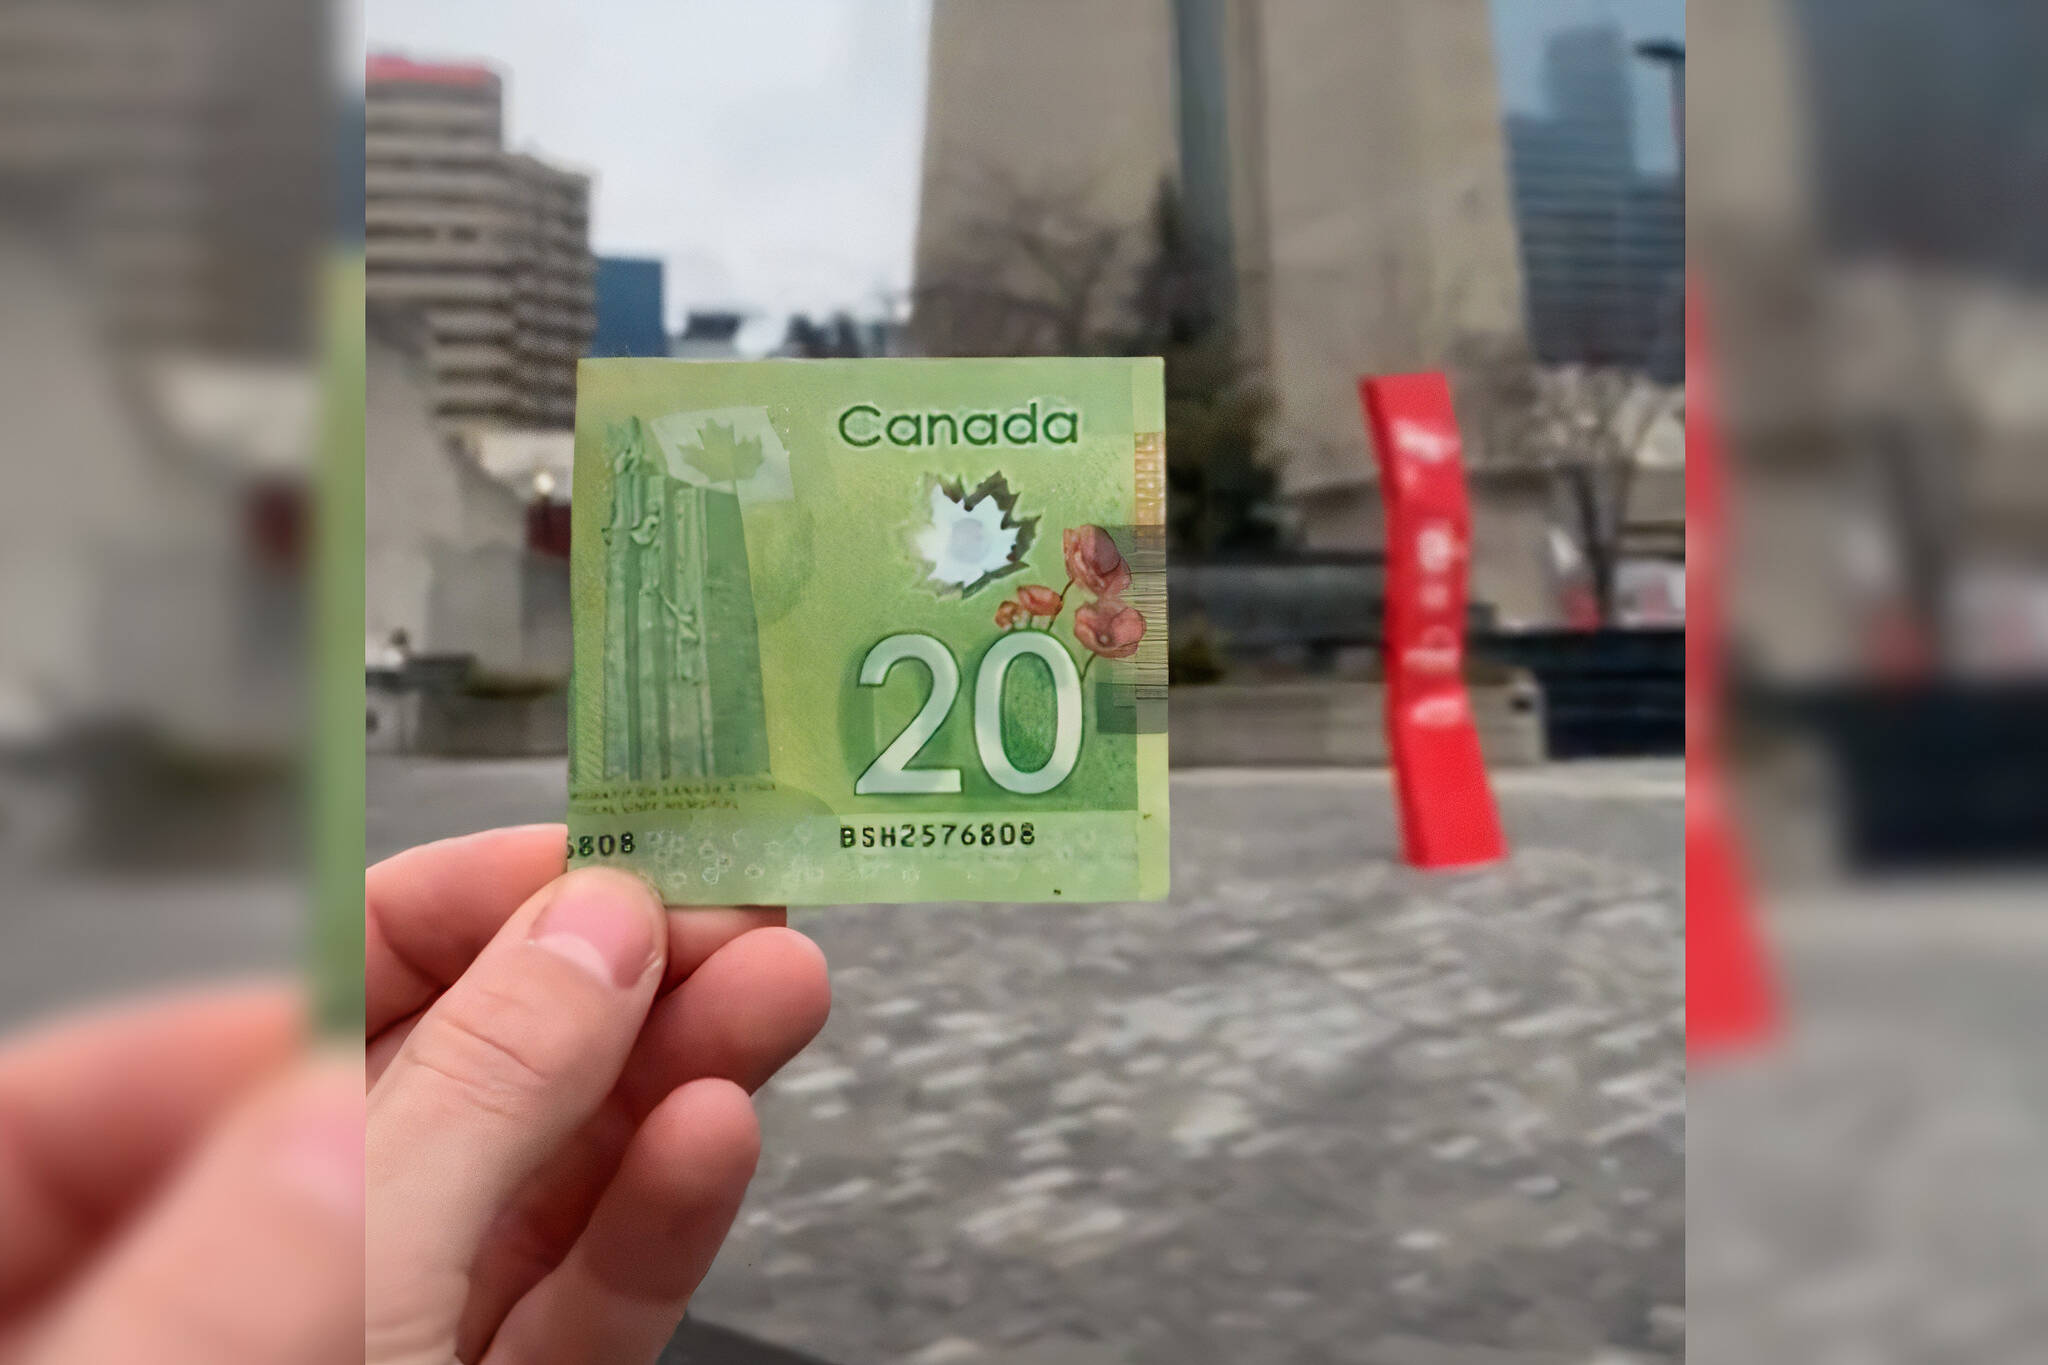 Someone in Toronto is hiding free money around for people to find